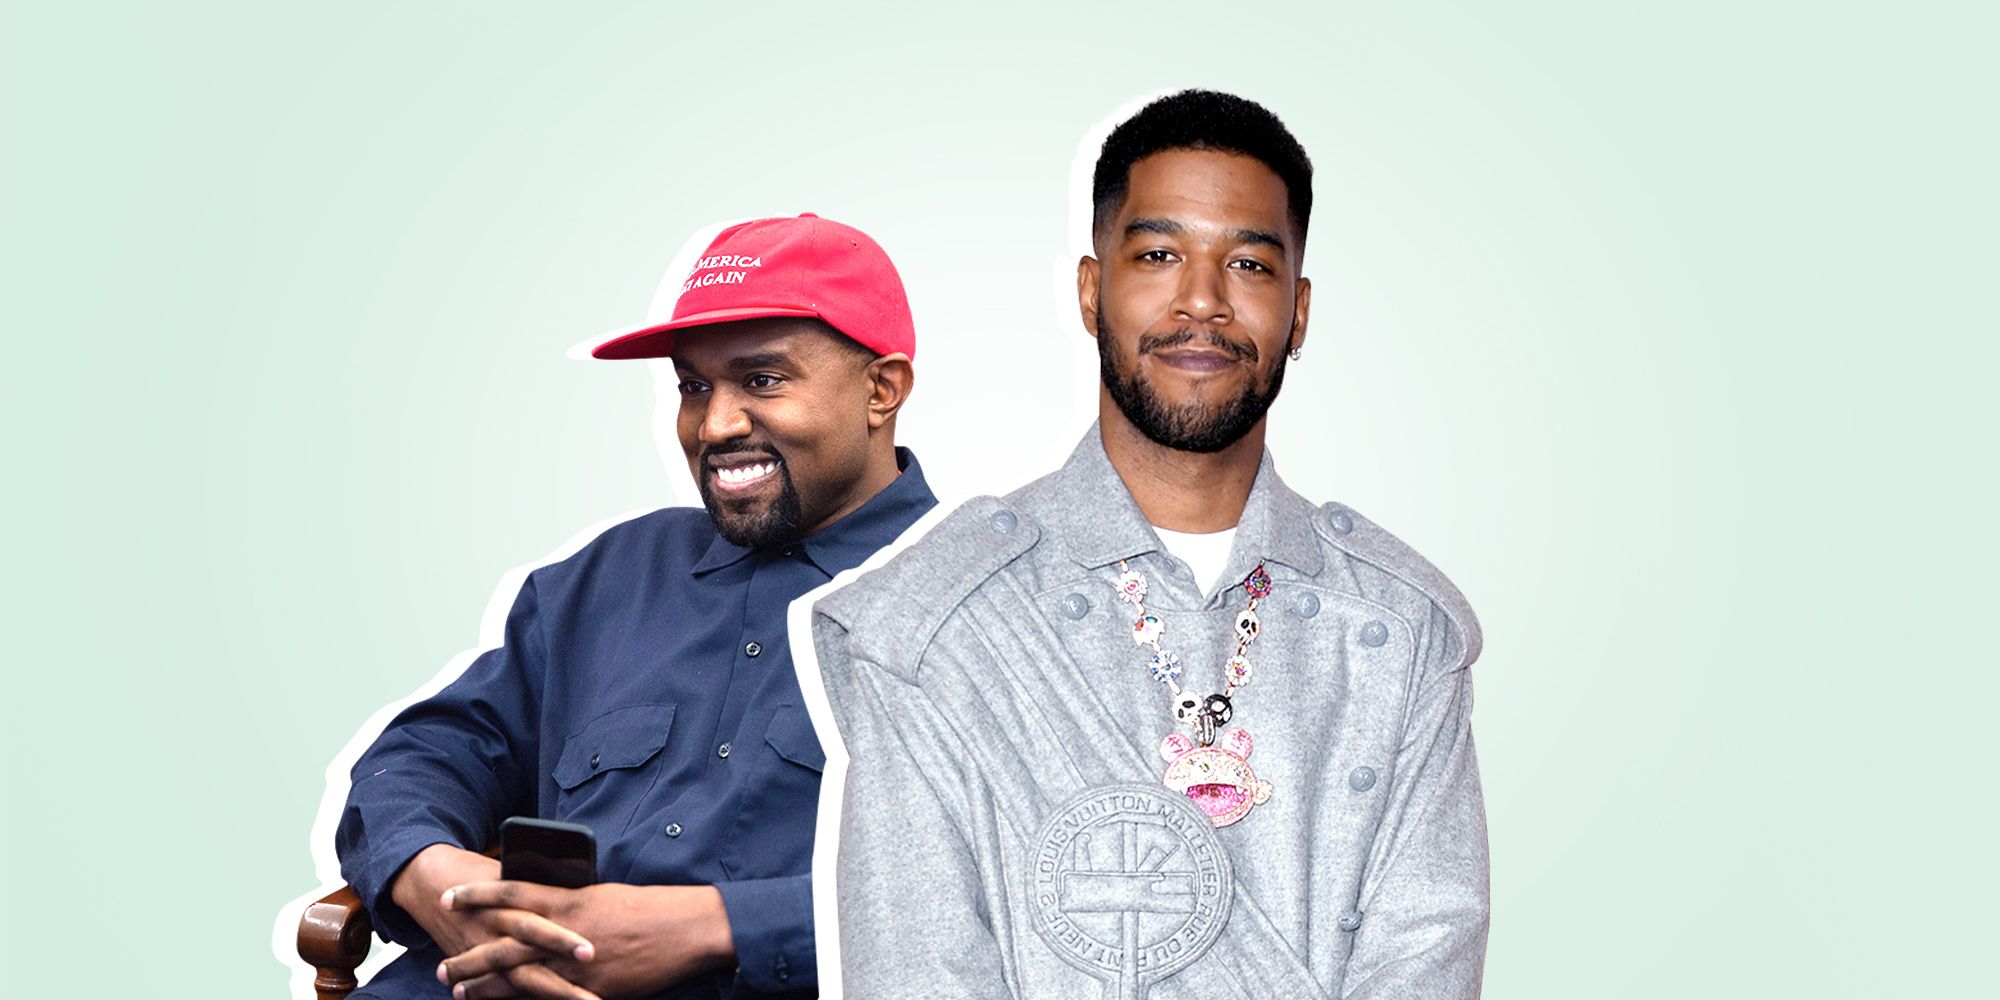 Kid Cudi On His Kanye West Friendship And Disagreeing About Trump